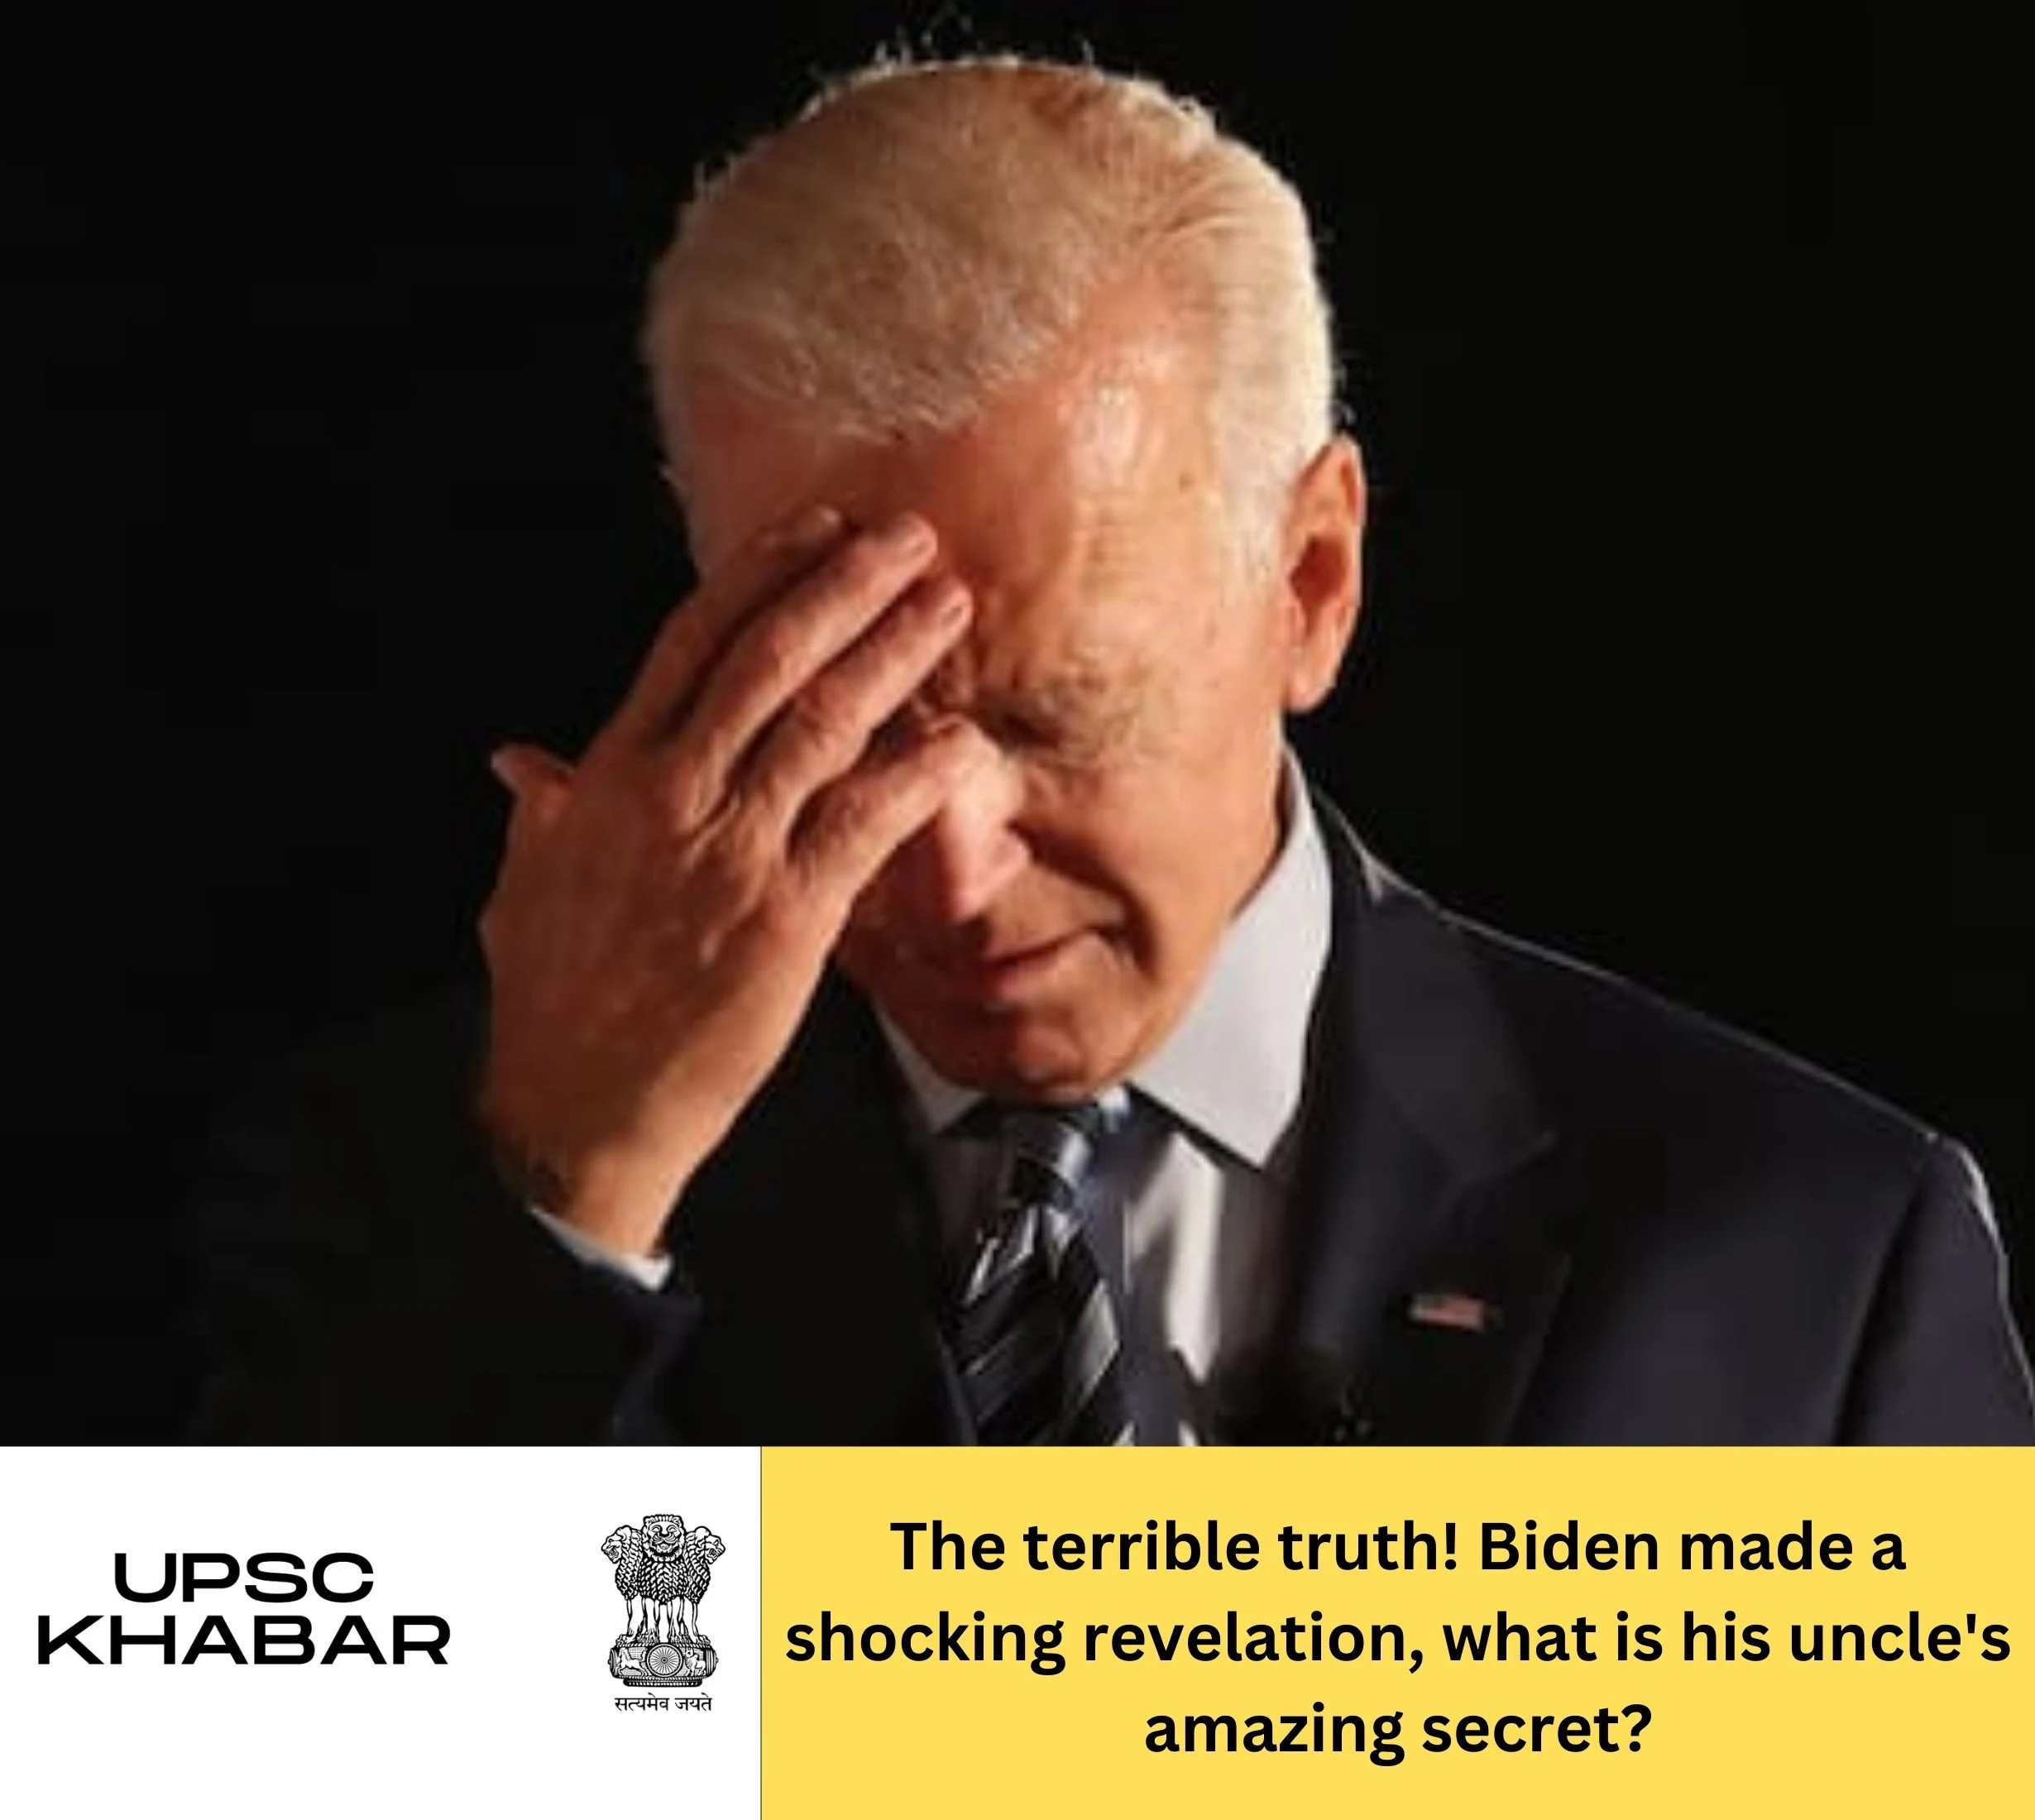 The terrible truth! Biden made a shocking revelation, what is his uncle's amazing secret?